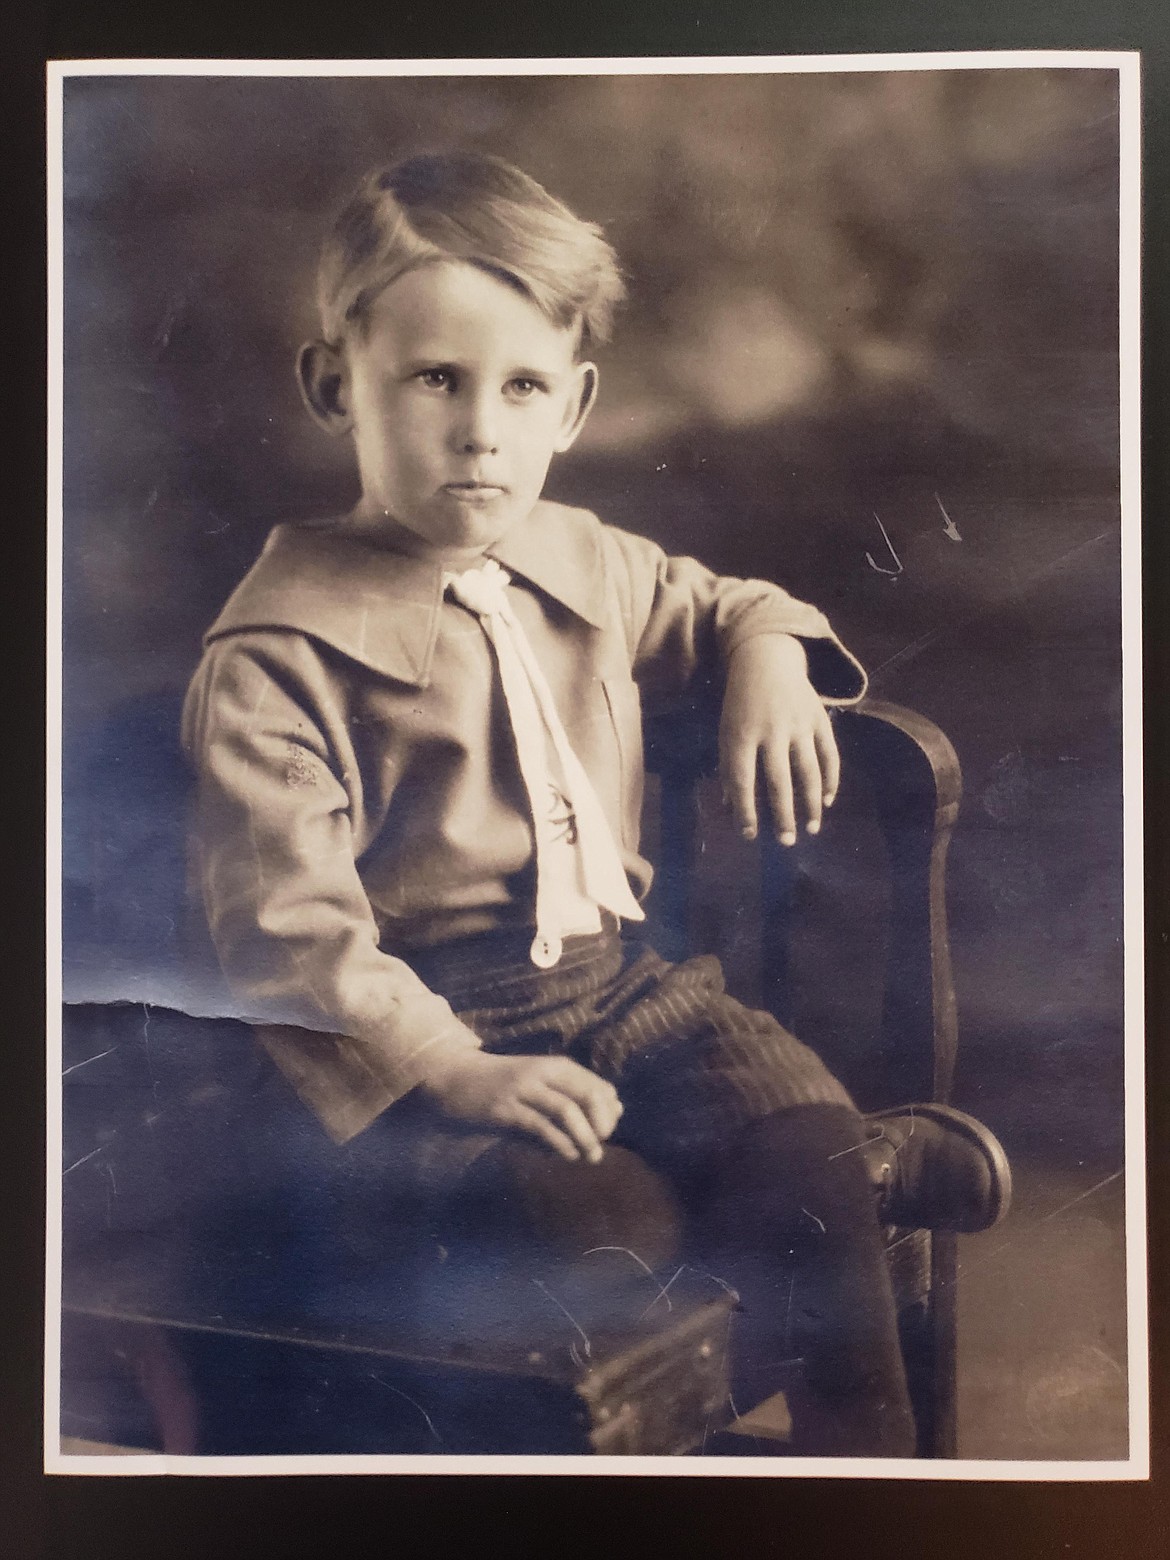 Barbara Bennett borrowed a family photo of Lovell Tucker, son of the Tucker Box Factory founder, to scan and enter to the city of Hayden's record of historical families Thursday.